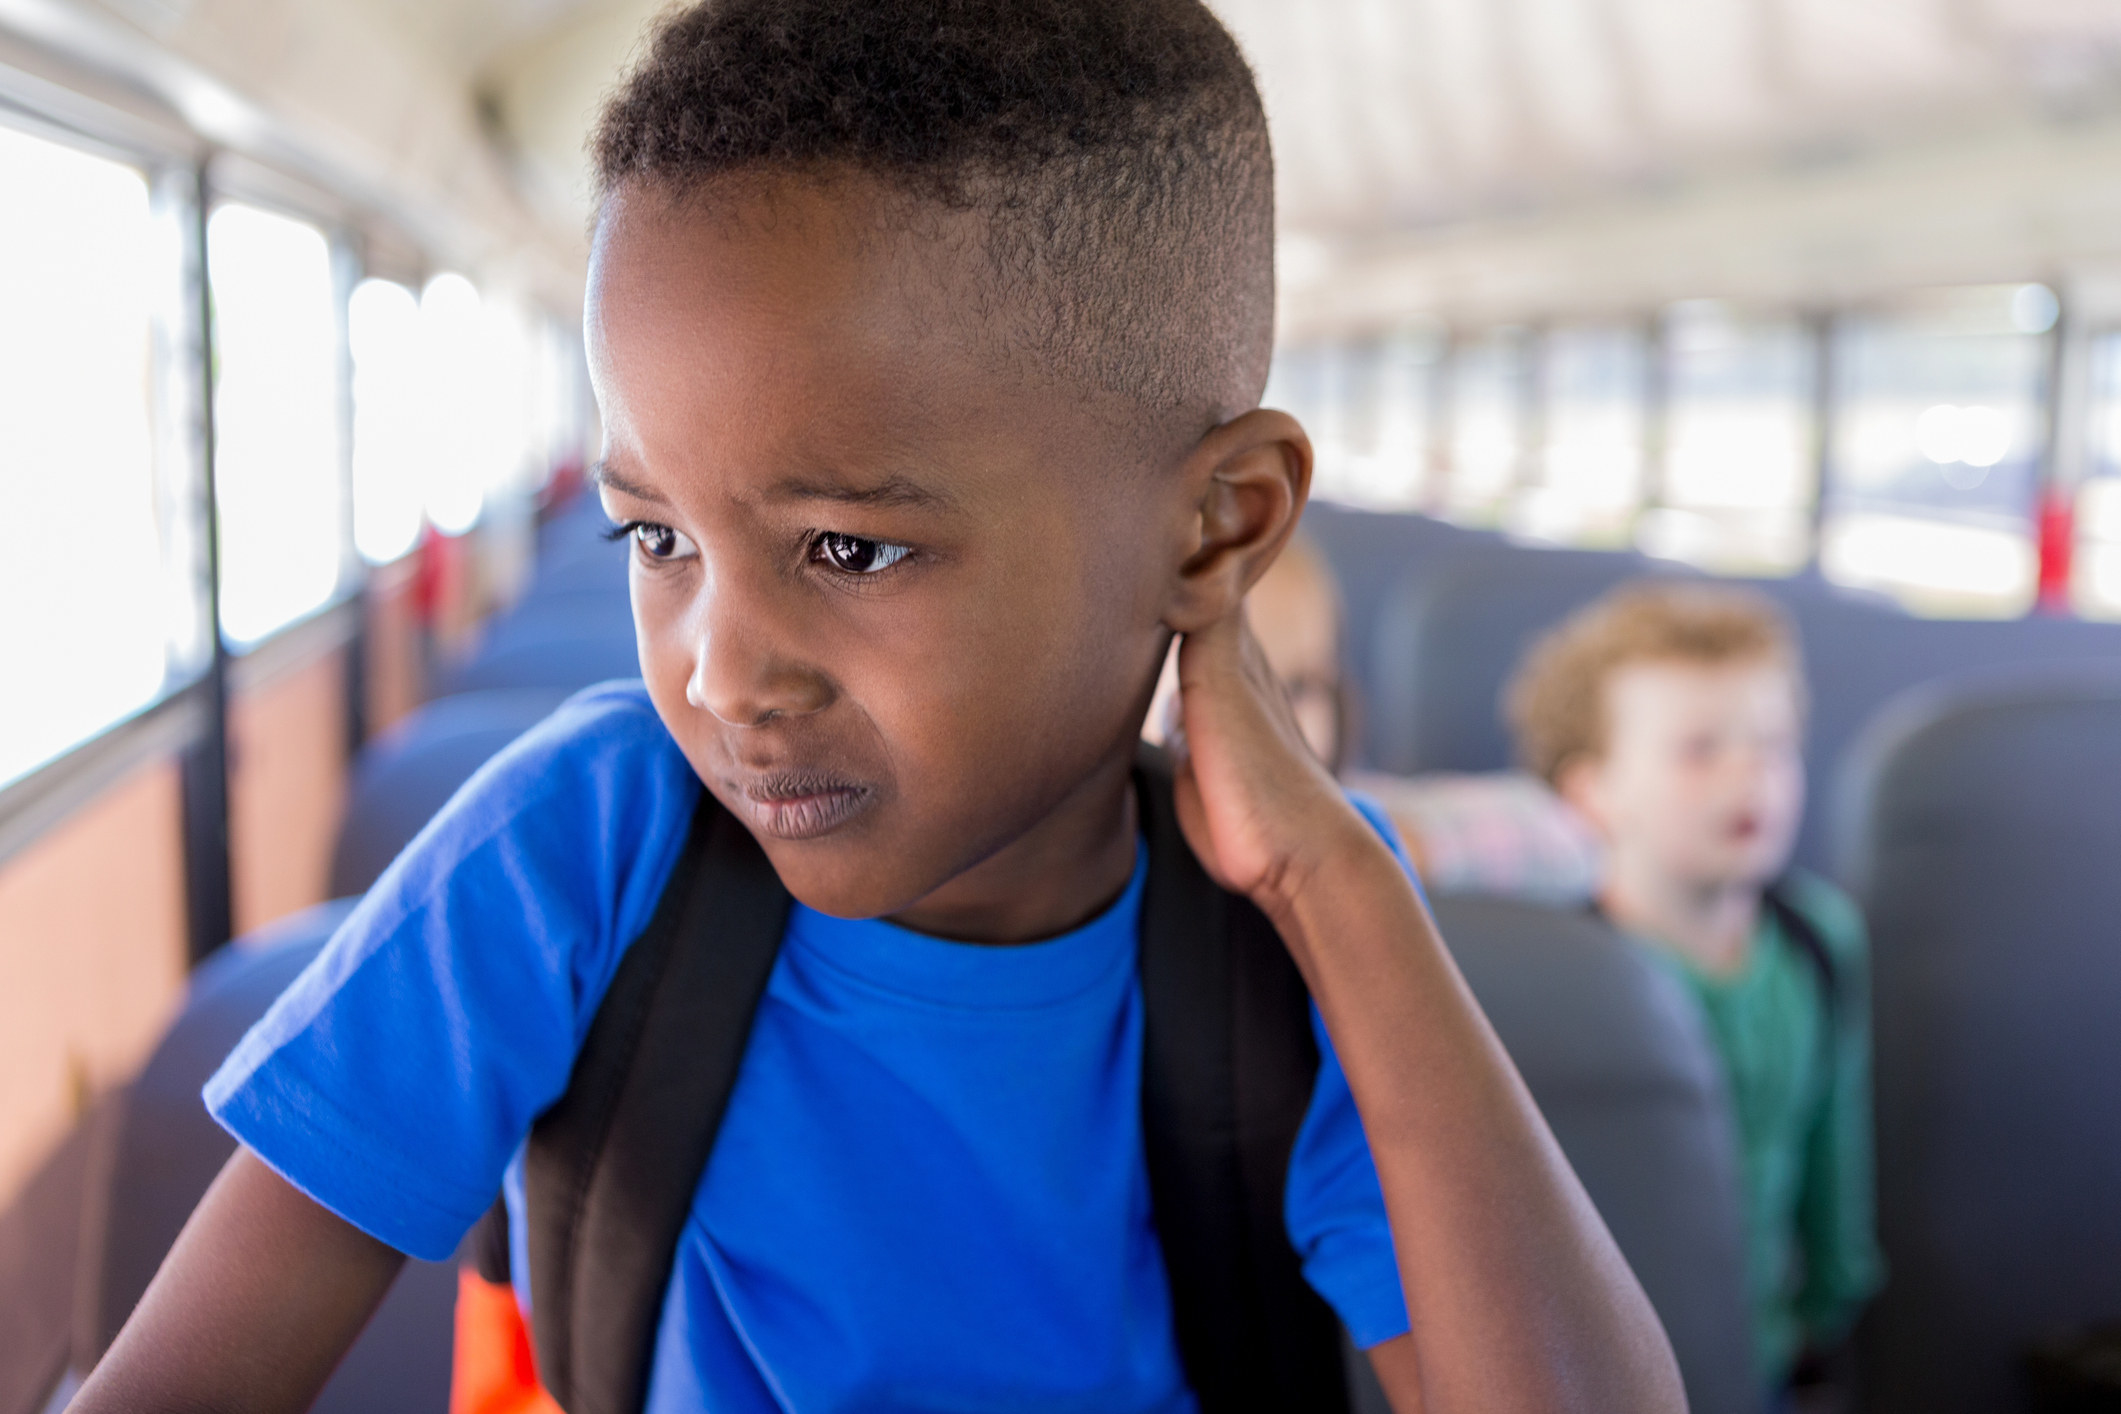 A little boy looking stressed and sad on a school bus